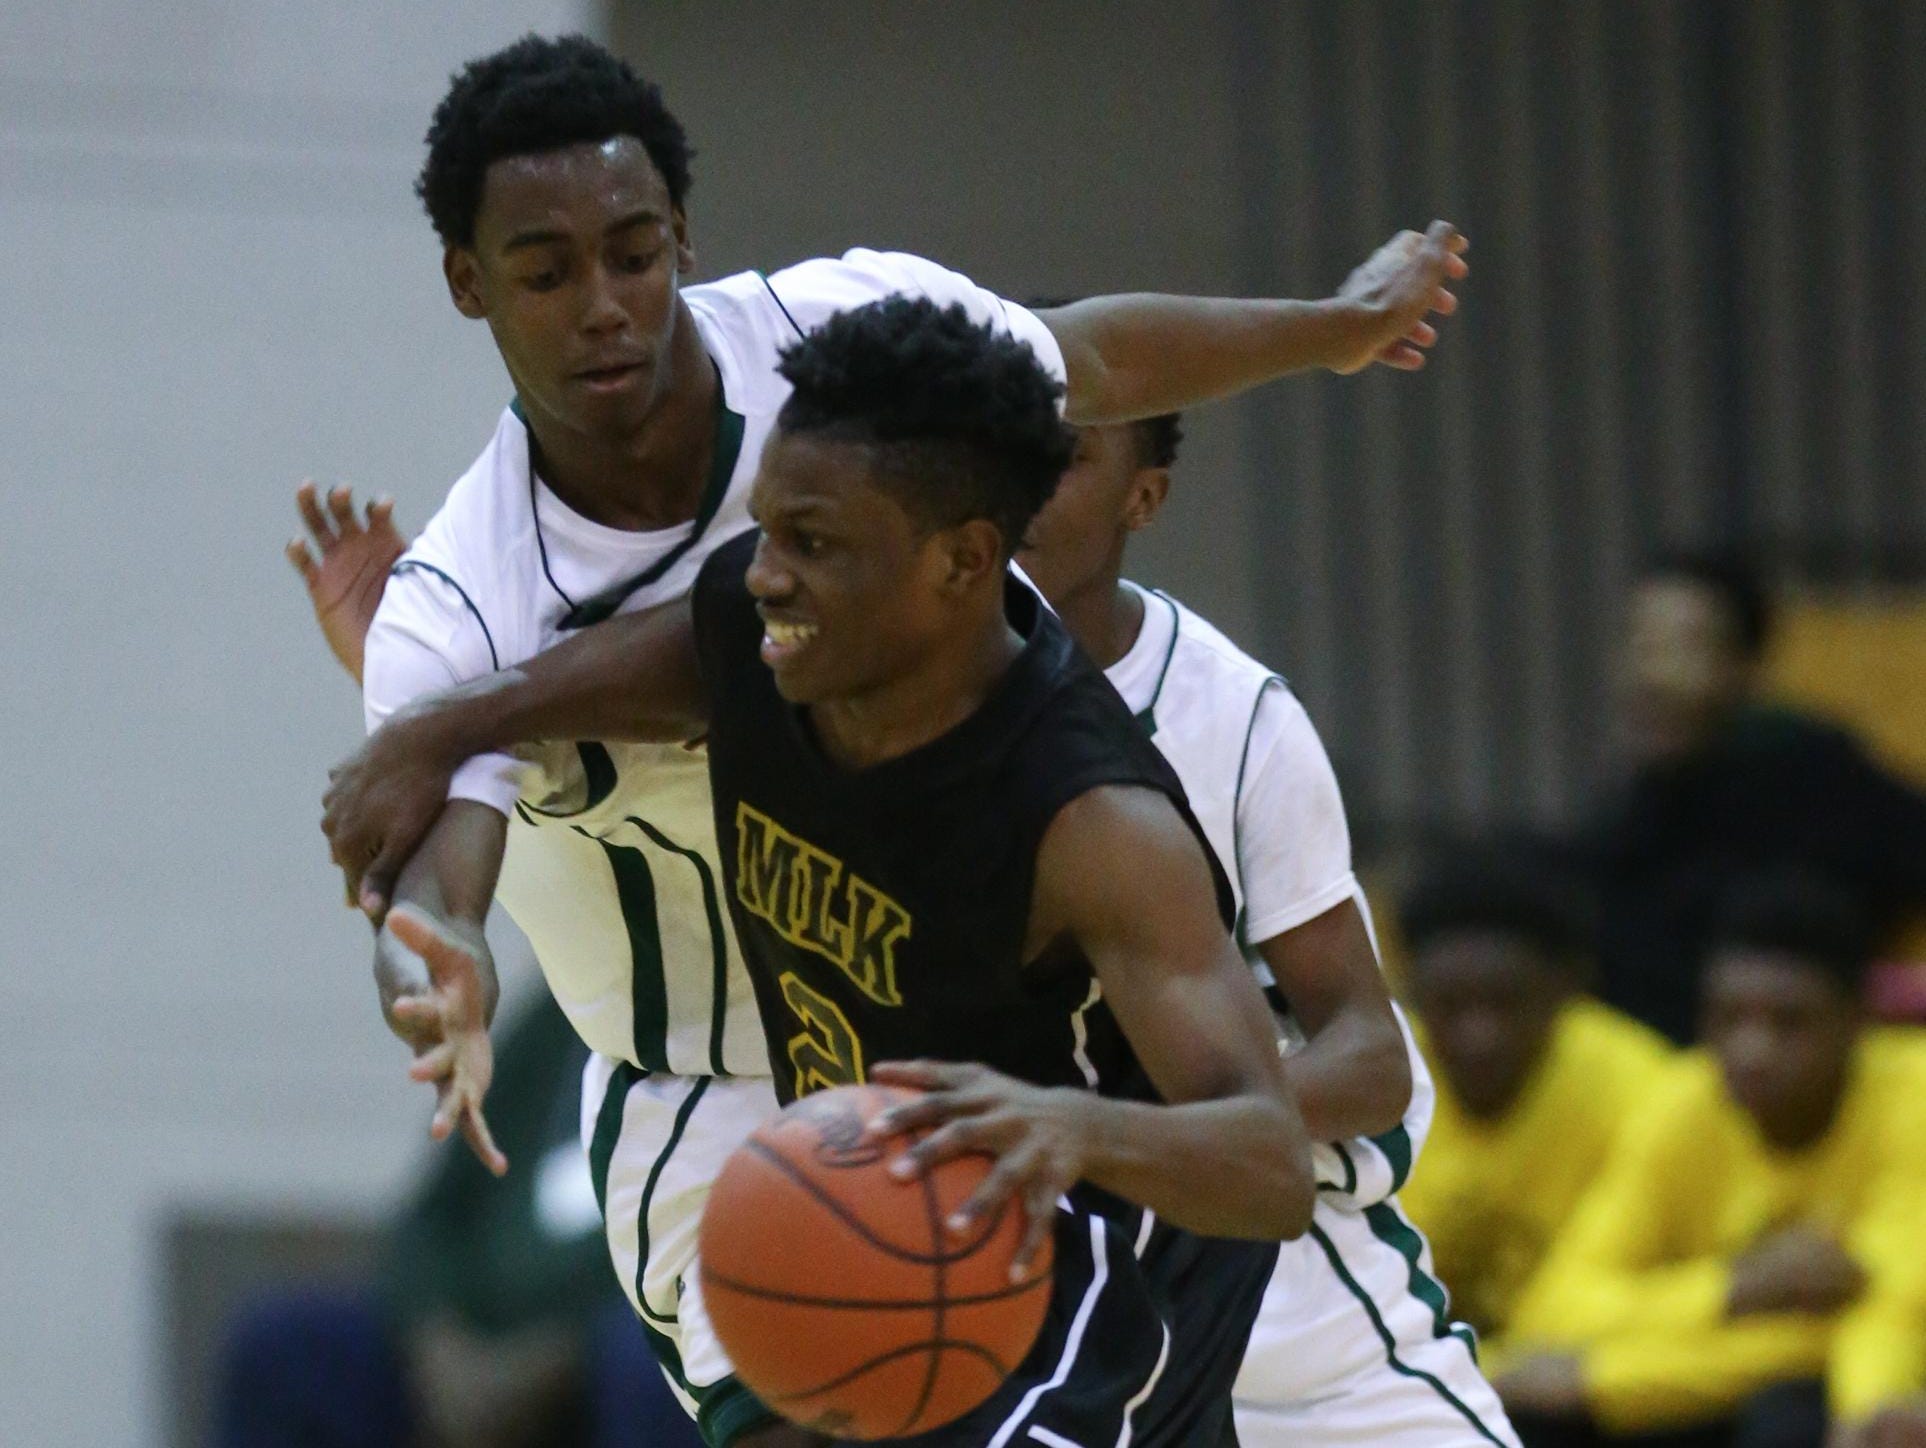 Detroit King’s Jesse Scarber drives against Detroit Douglass’ James Smith during the fourth quarter Tuesday at Detroit Cass Tech. Scarber was King’s defensive hero in the 58-44 win with three steals in the fourth. “We had to step up our defense,” Scarber said.